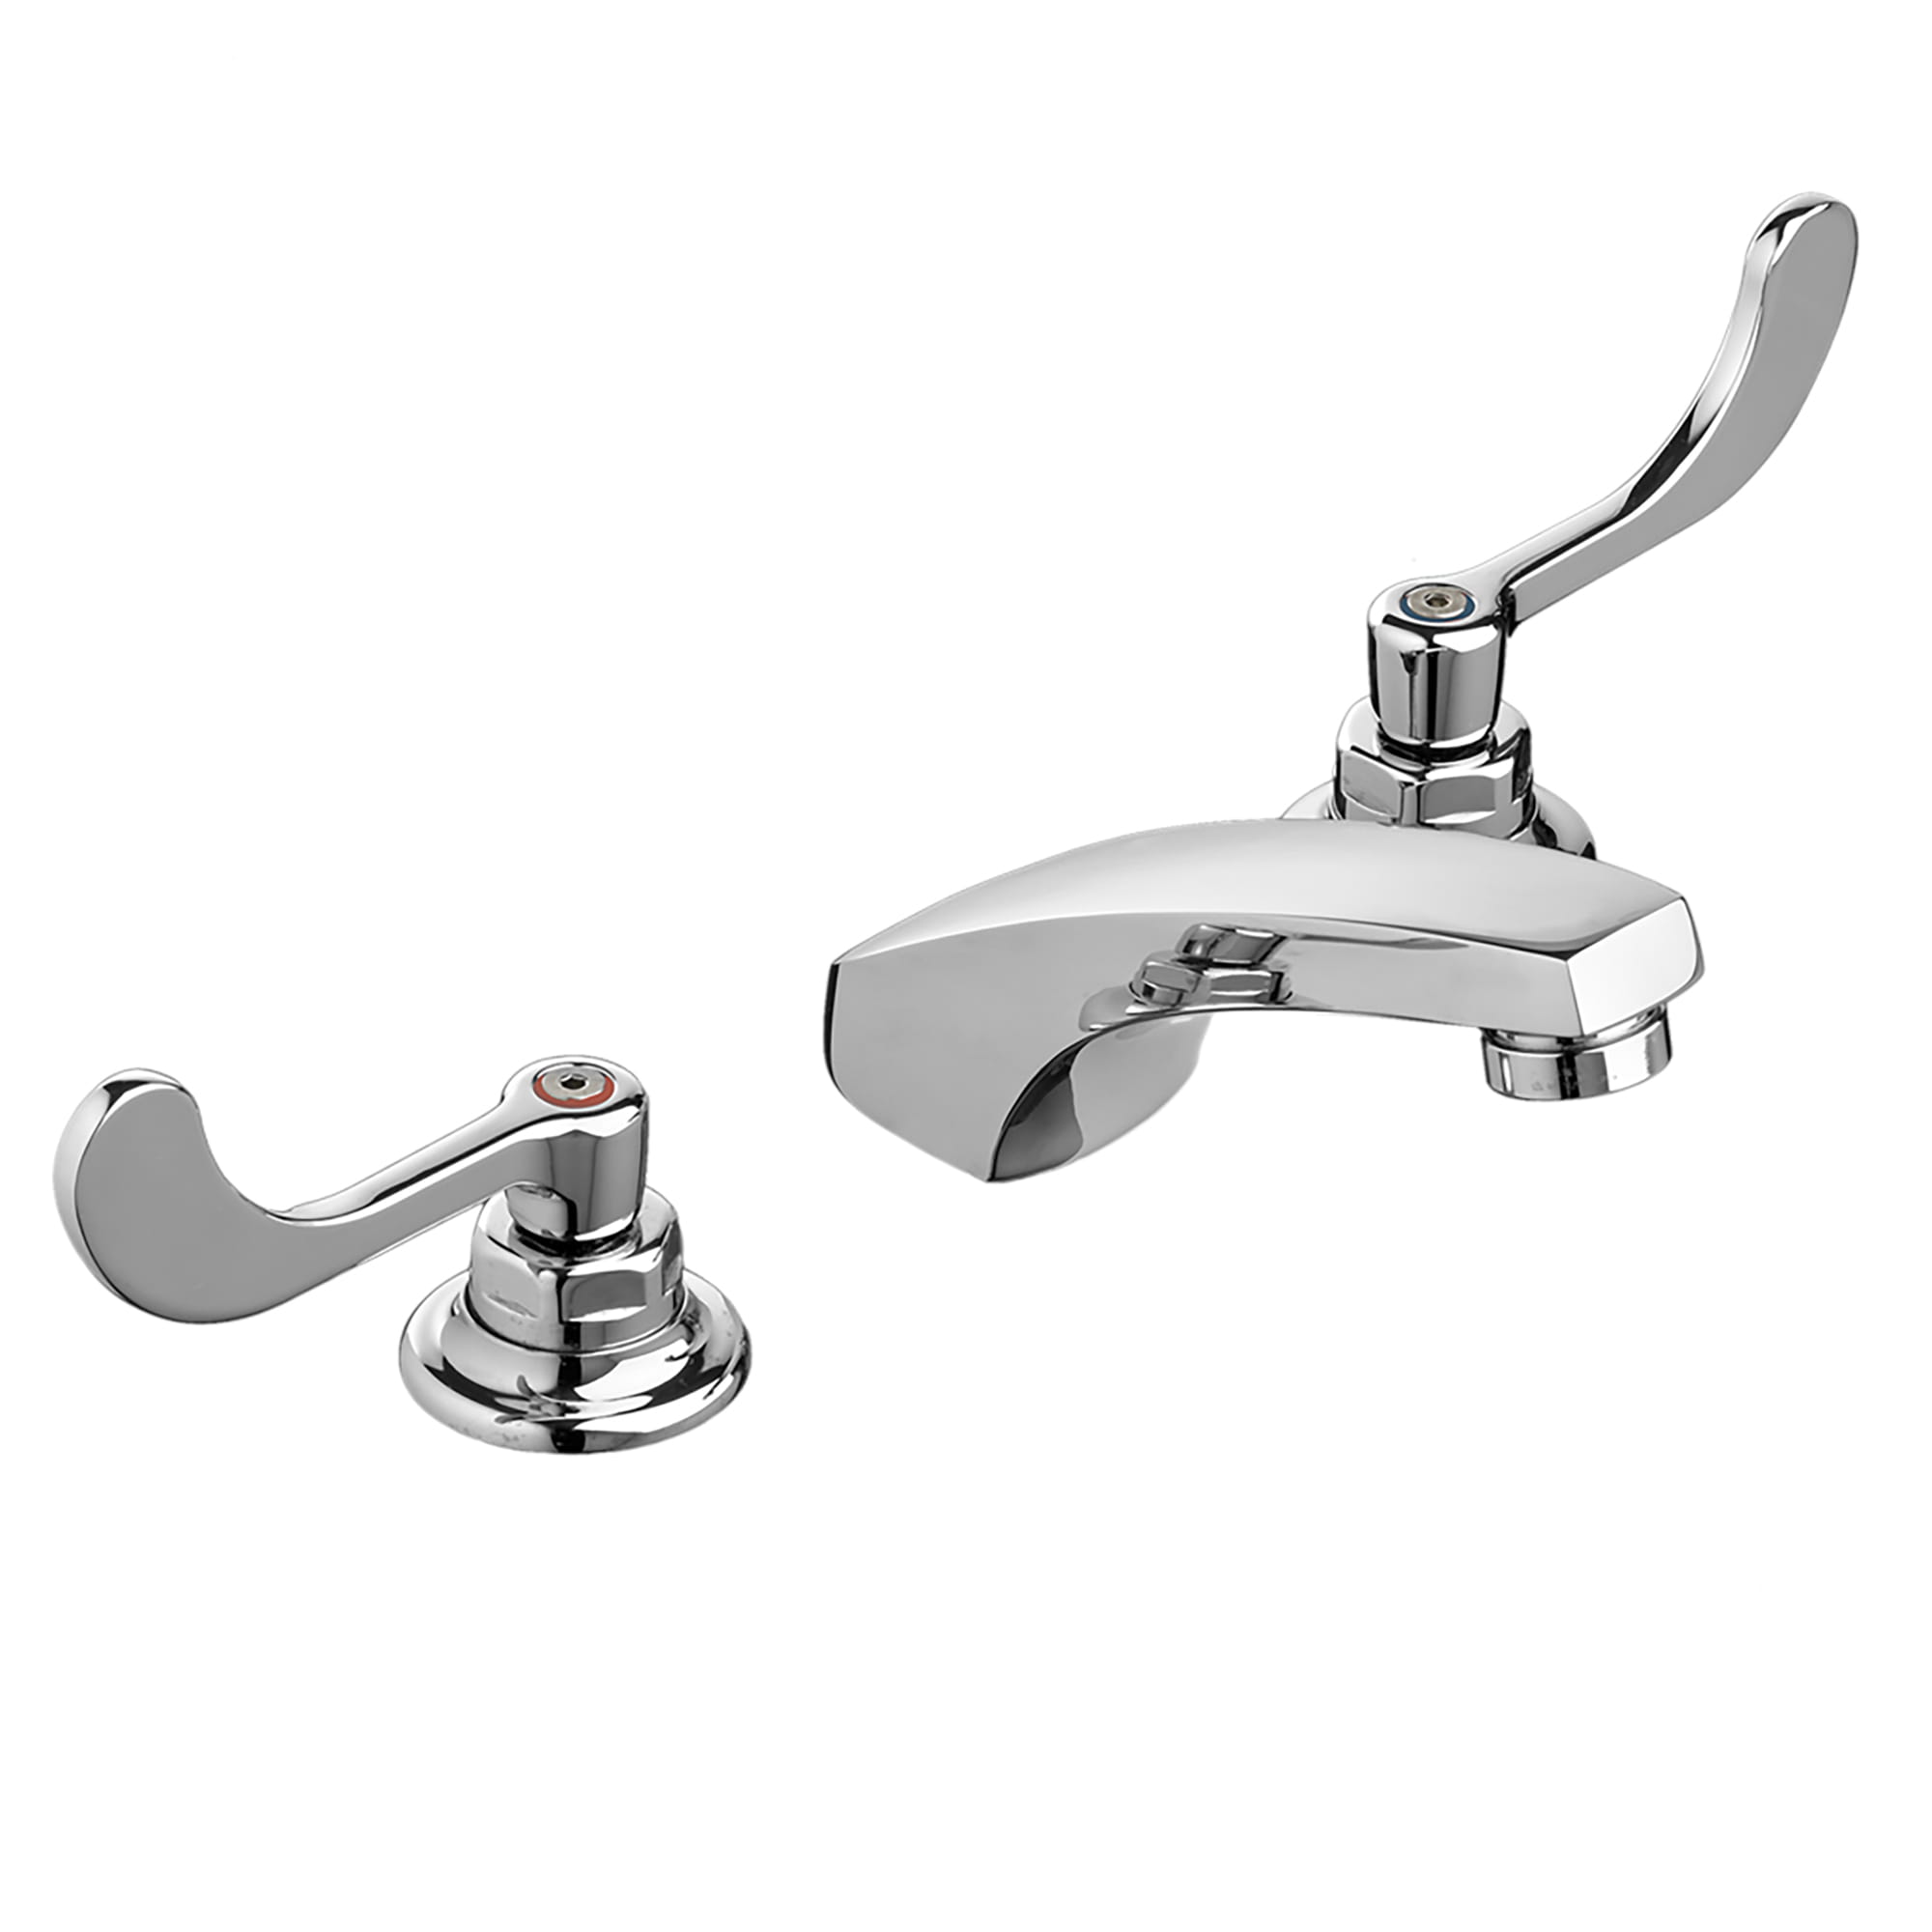 Monterrey® 8-Inch Widespread Cast Faucet With Wrist Blade Handles 0.5 gpm/1.9 Lpm With Flexible Underbody